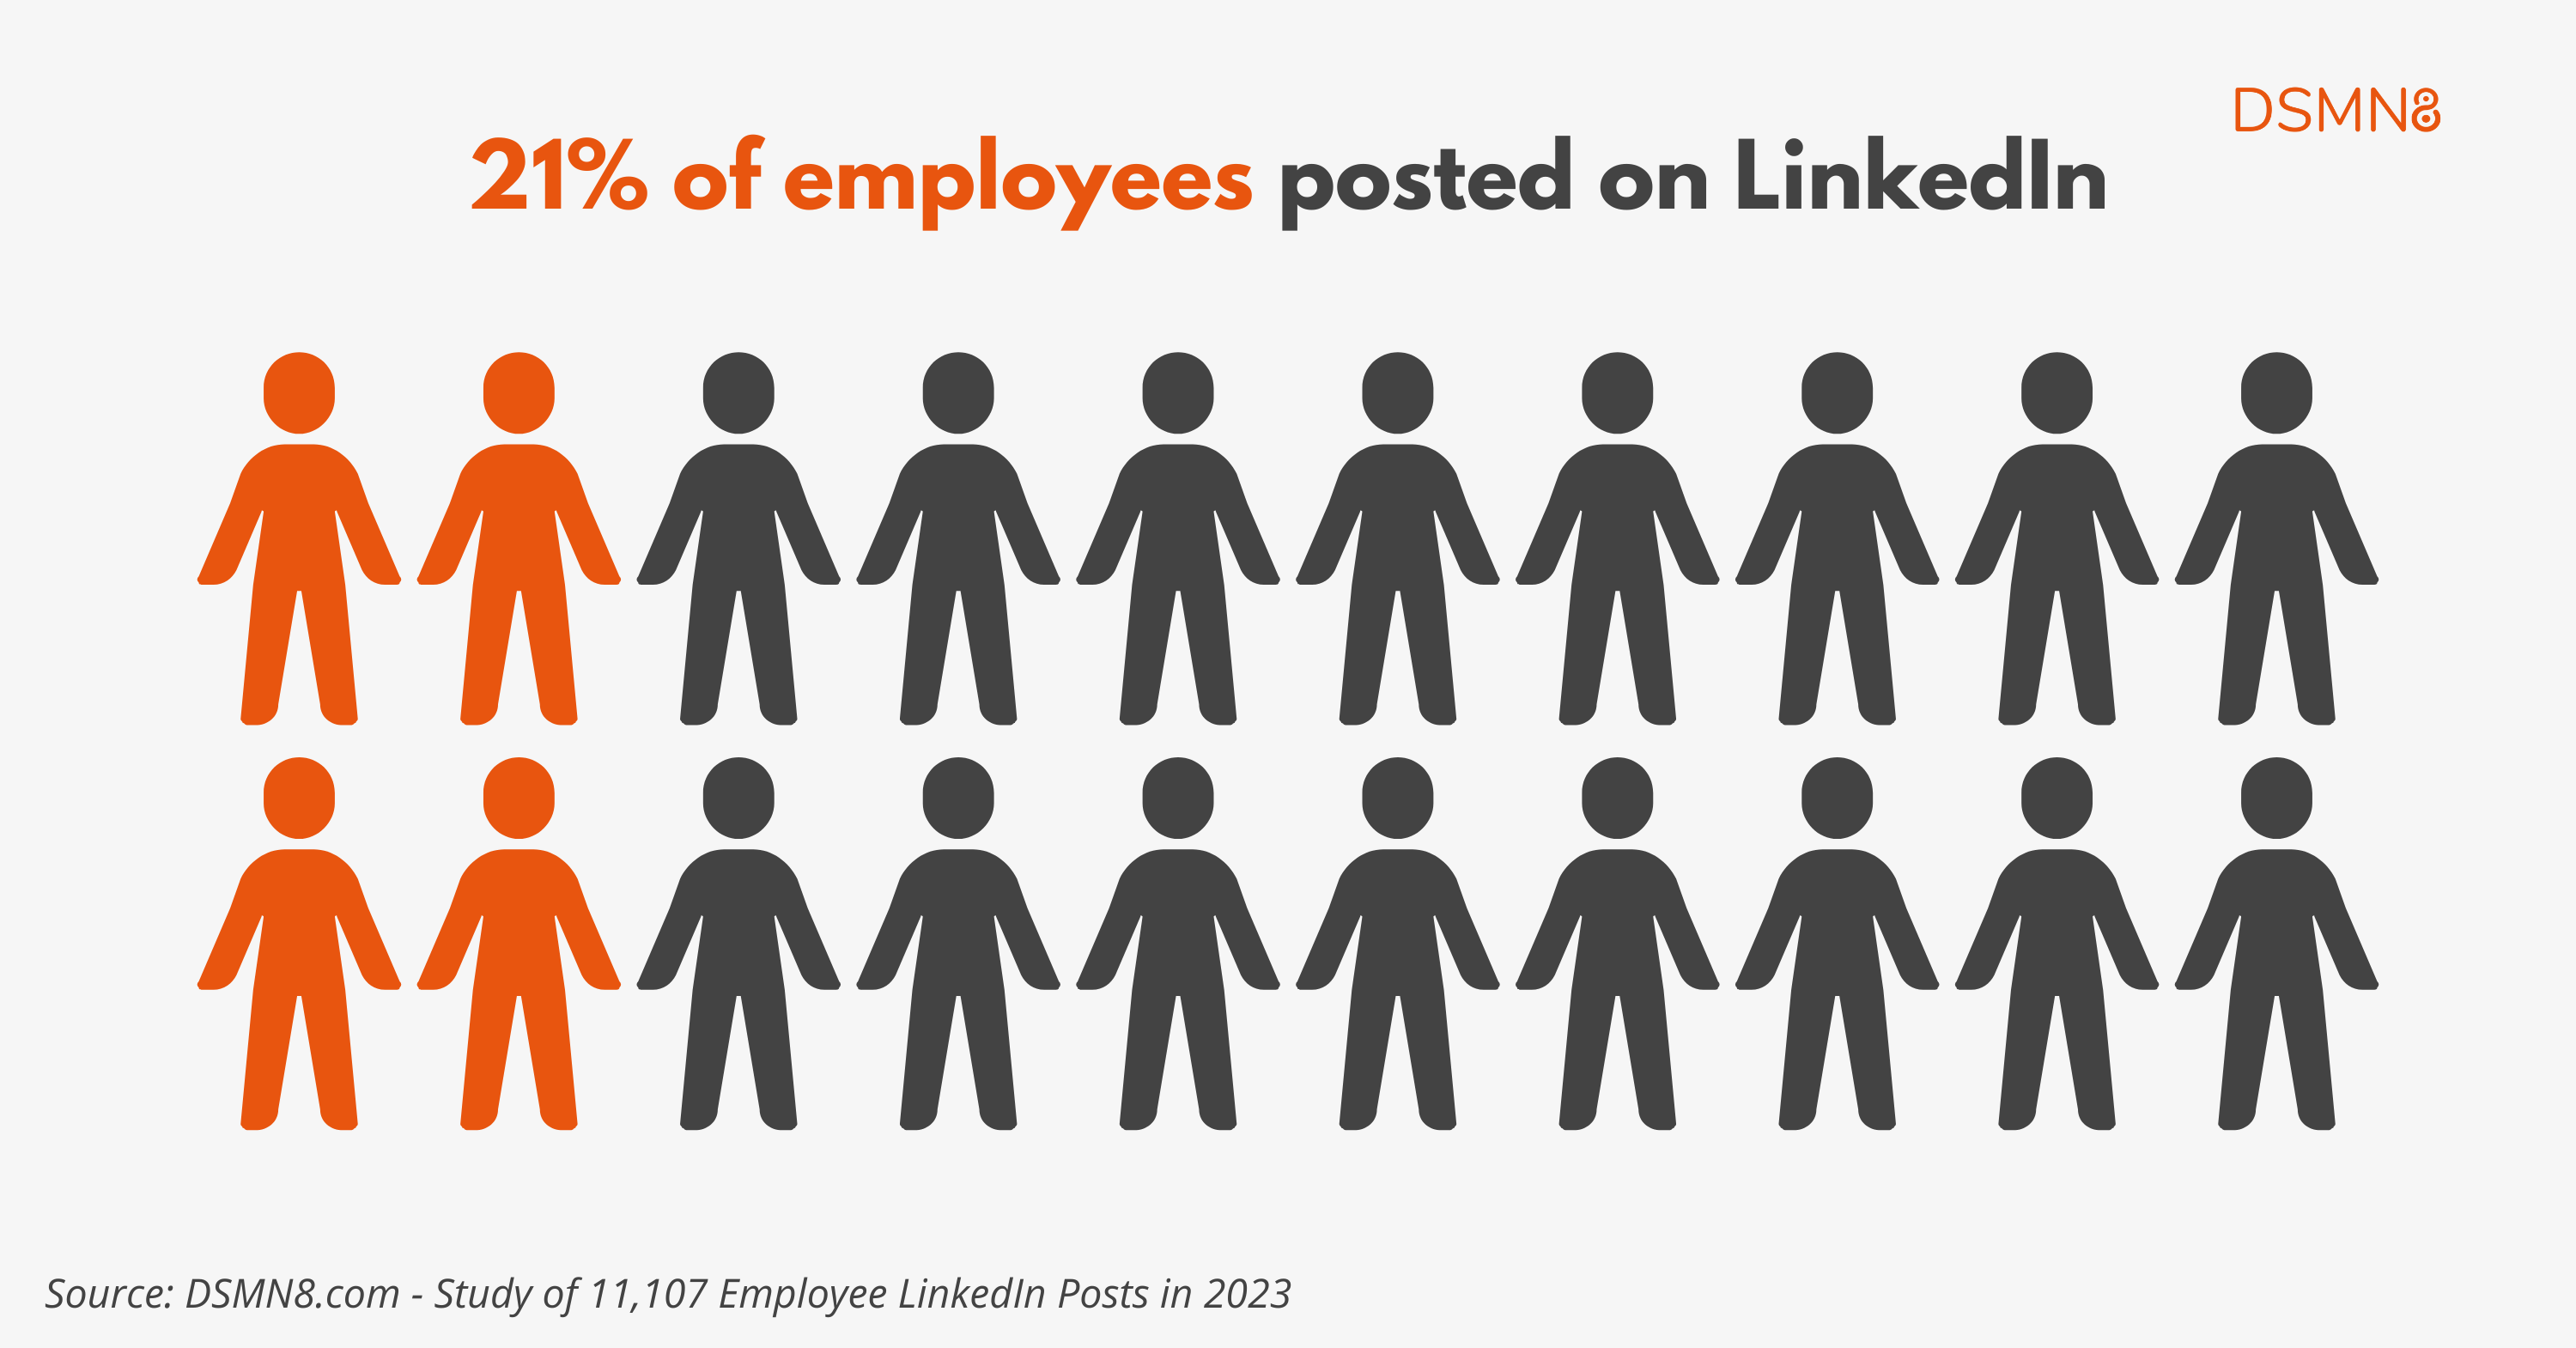 21% of employees posted on LinkedIn